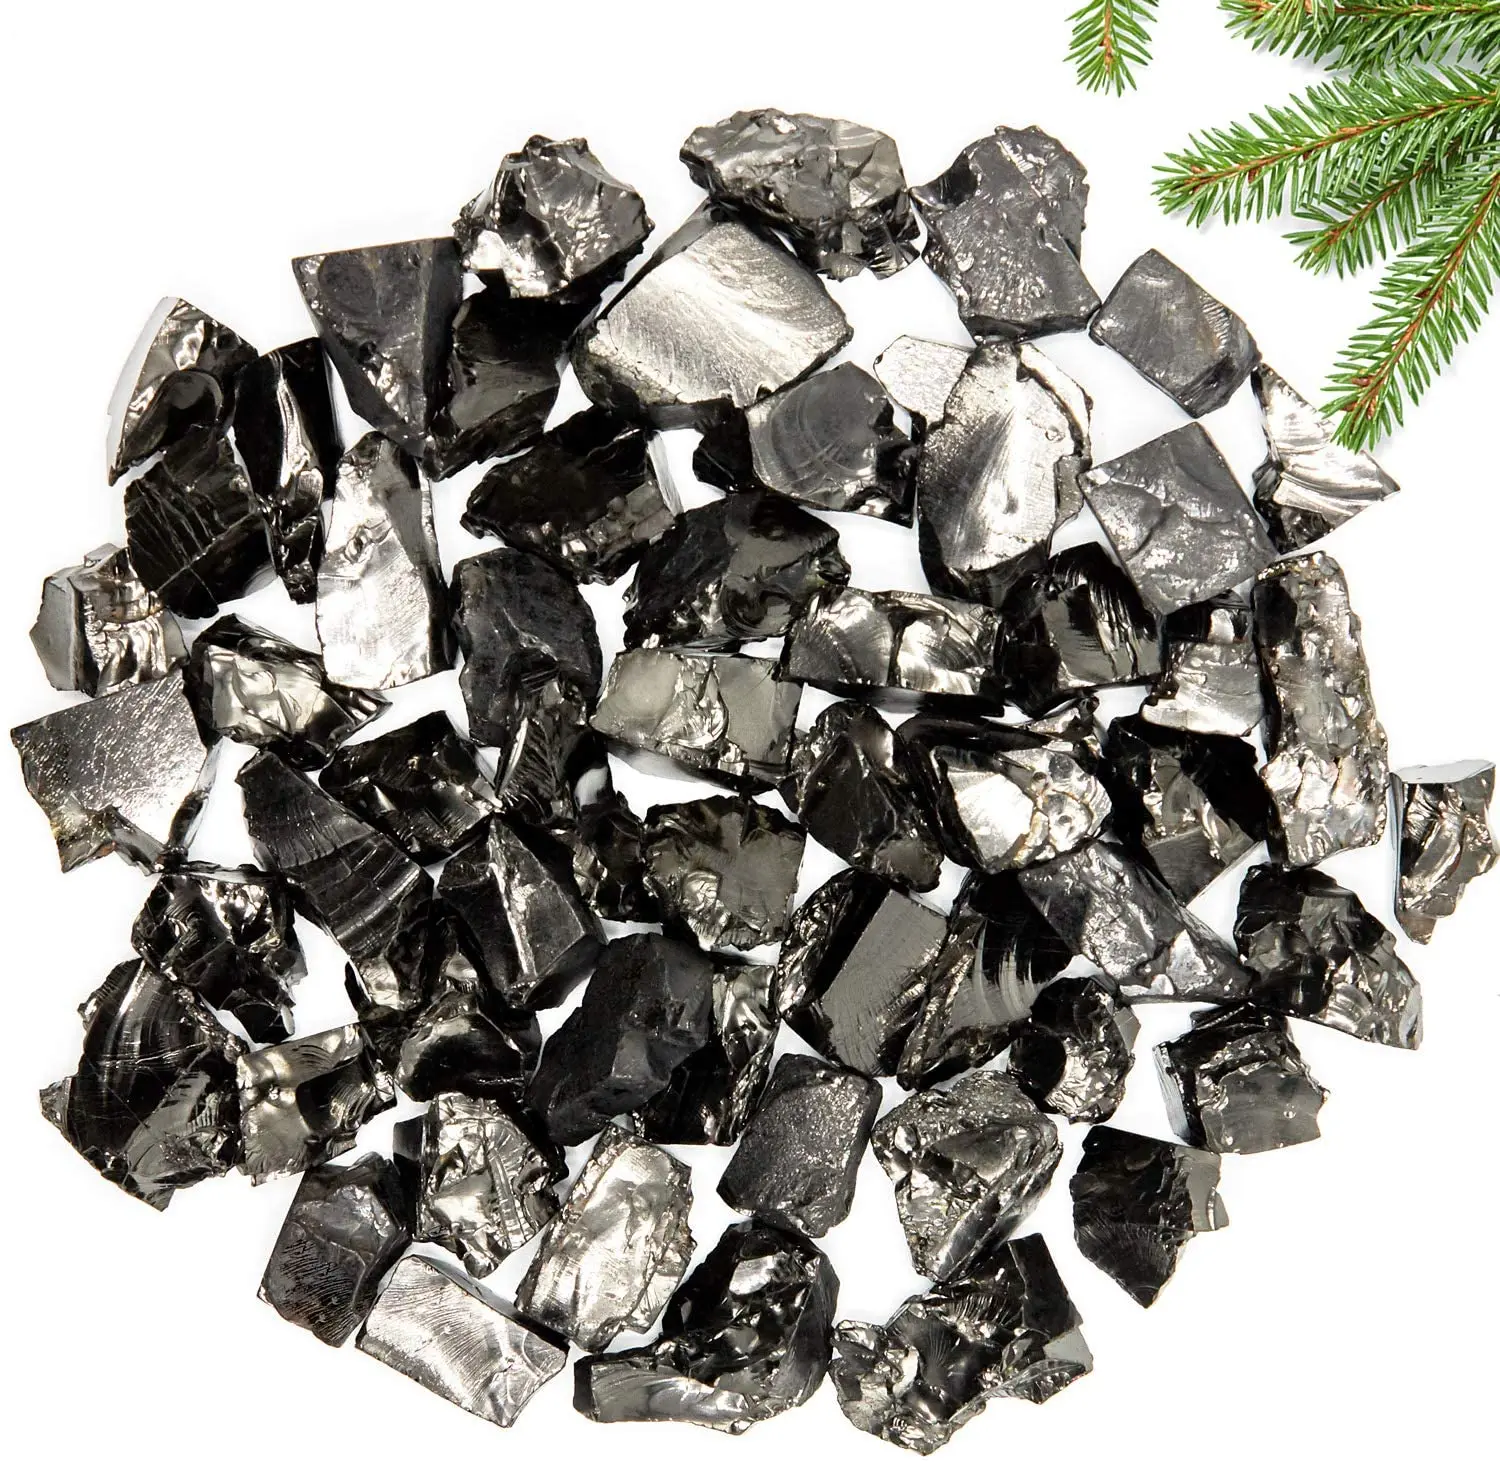 Shungite Elite Stones for Water Purification and Jewelry Making 50 GMS of Shine Raw Elite Noble Shungite Detoxification Stones Natural and Authentic Nuggets from Karelia Russia 